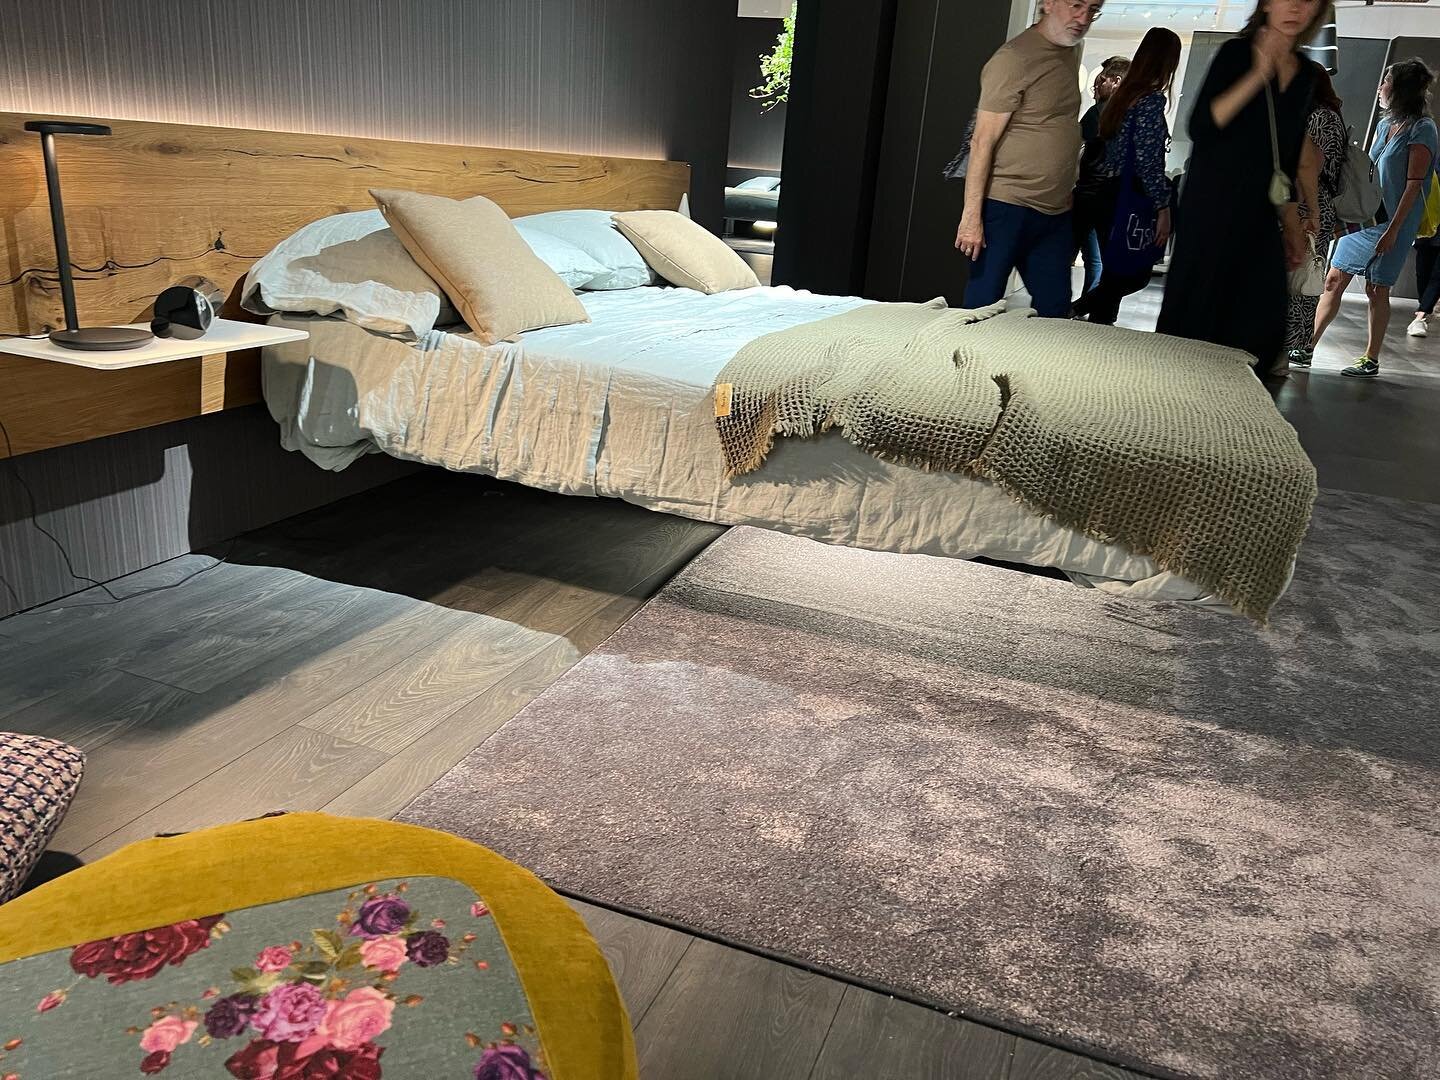 Floating bed that I&rsquo;ve seen in Milan. @ Salone. So cool!